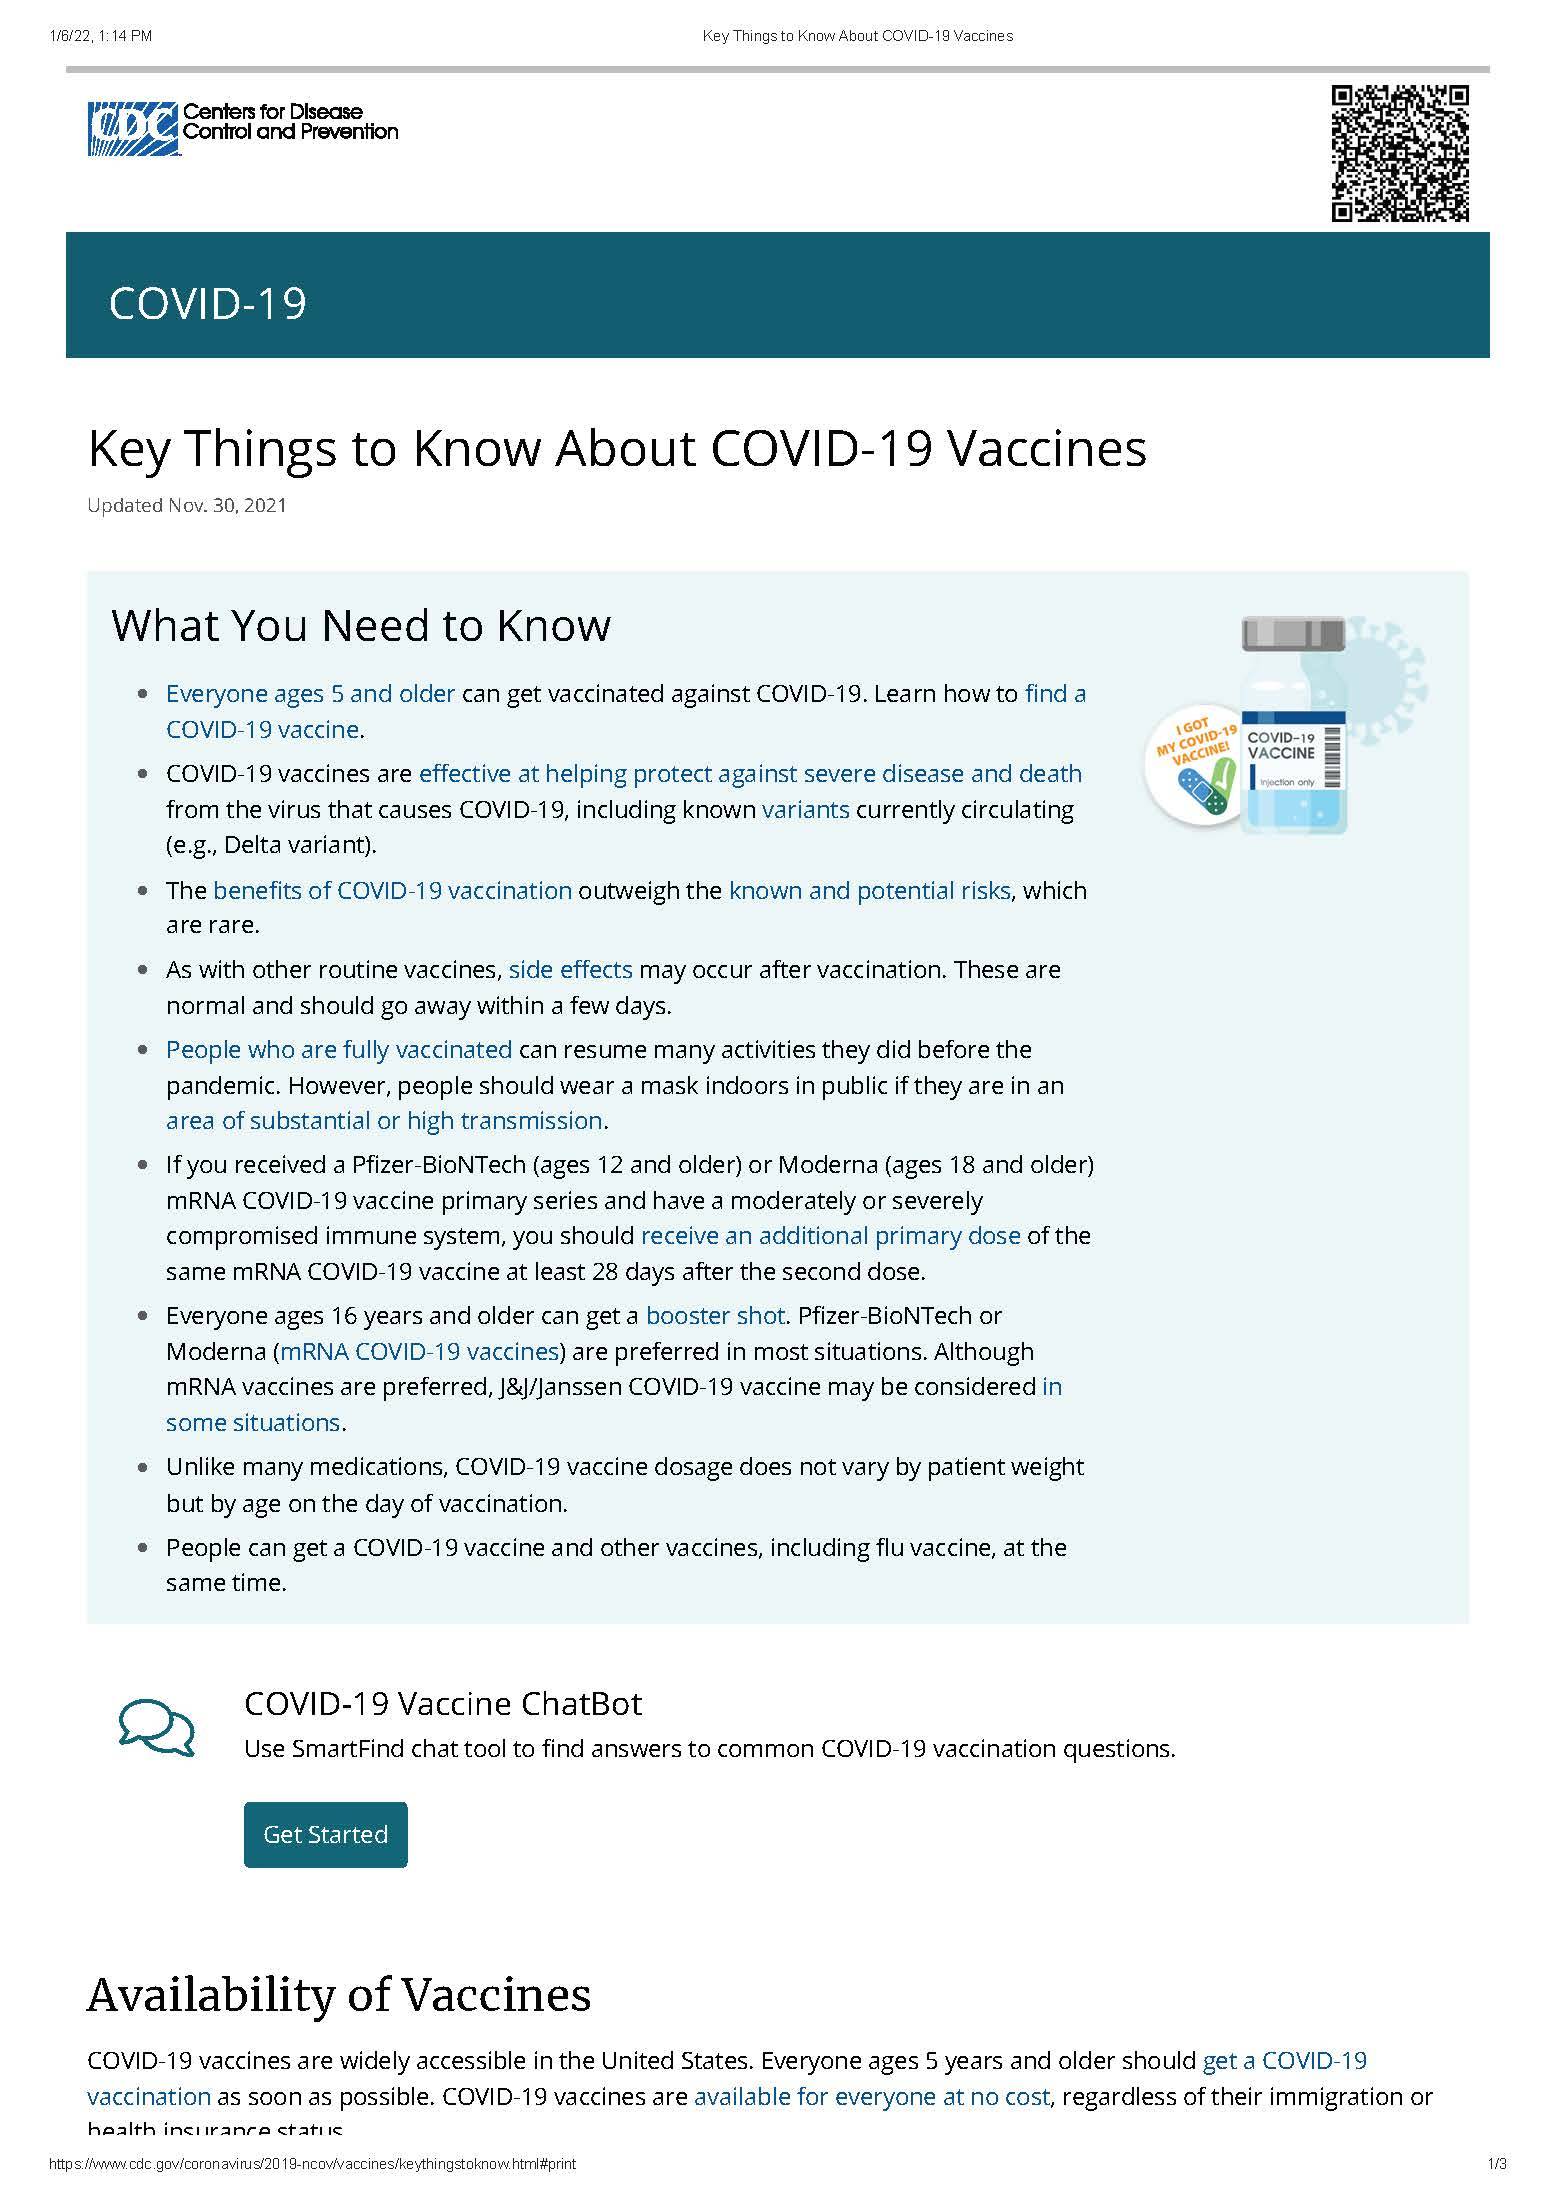 Key things to know about COVID-19